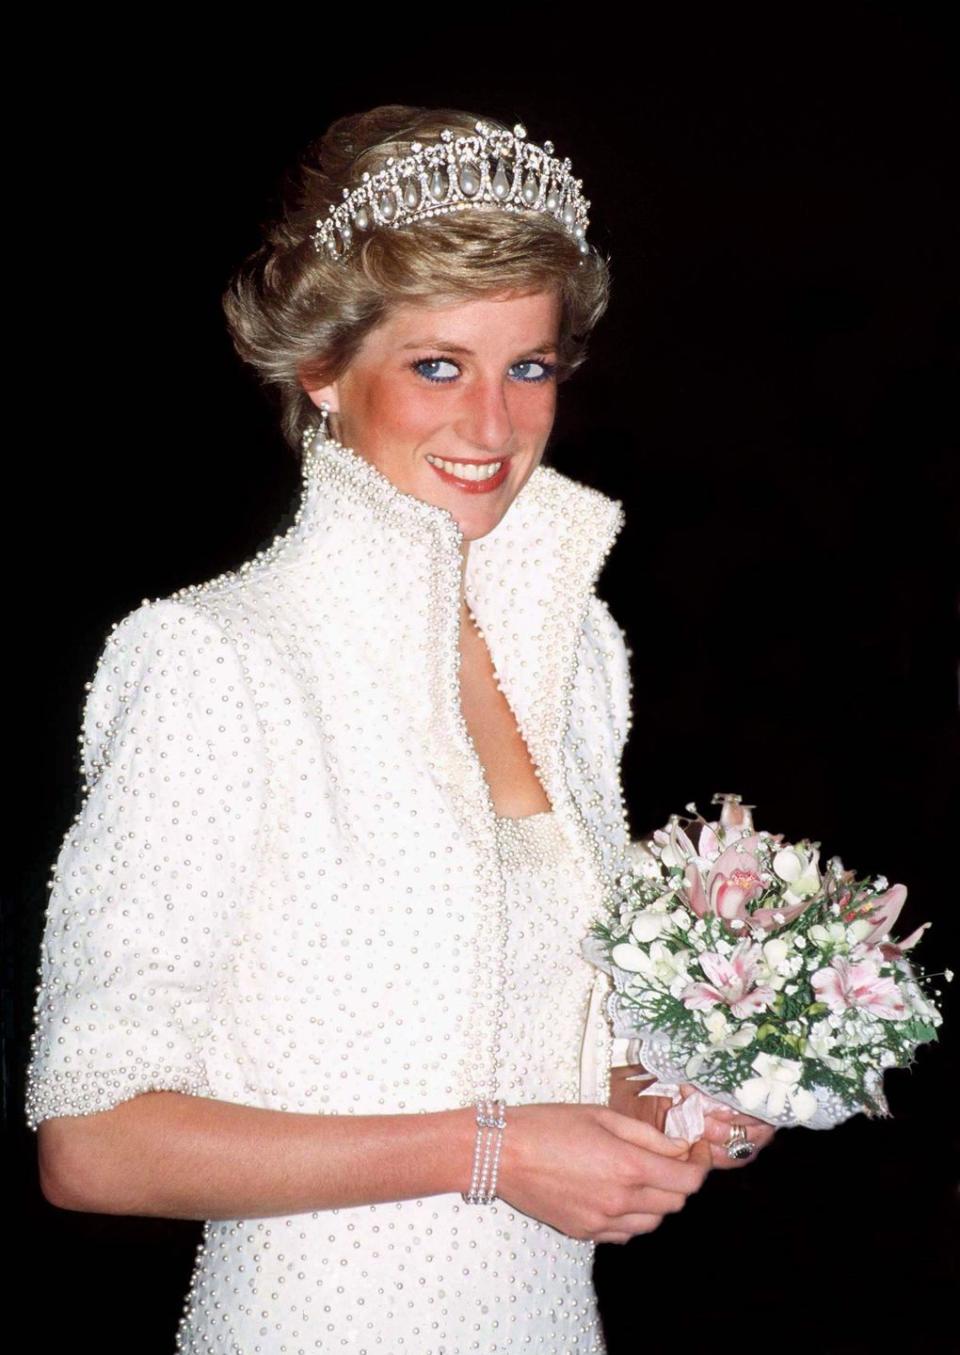 <p><em>Princess of Wales from 1981 until her death in 1997. </em></p><p>The next Princess of Wales would not be until decades after Mary; Mary and George's son, Prince Edward, was the next Prince of Wales, but never married while he had the title (he later abdicated the throne to marry Wallis Simpson), and then his younger brother, King George VI, did not have a son. </p><p>Therefore, the next Prince of Wales was Prince Charles, Queen Elizabeth's eldest son. His wife, <a href="https://www.townandcountrymag.com/society/tradition/g10239753/princess-diana-life-in-pictures/" rel="nofollow noopener" target="_blank" data-ylk="slk:Diana Spencer, became Princess of Wales" class="link ">Diana Spencer, became Princess of Wales</a> upon their marriage in 1981, and though they divorced in 1996, she was still styled Diana, Princess of Wales until her tragic early death.</p>